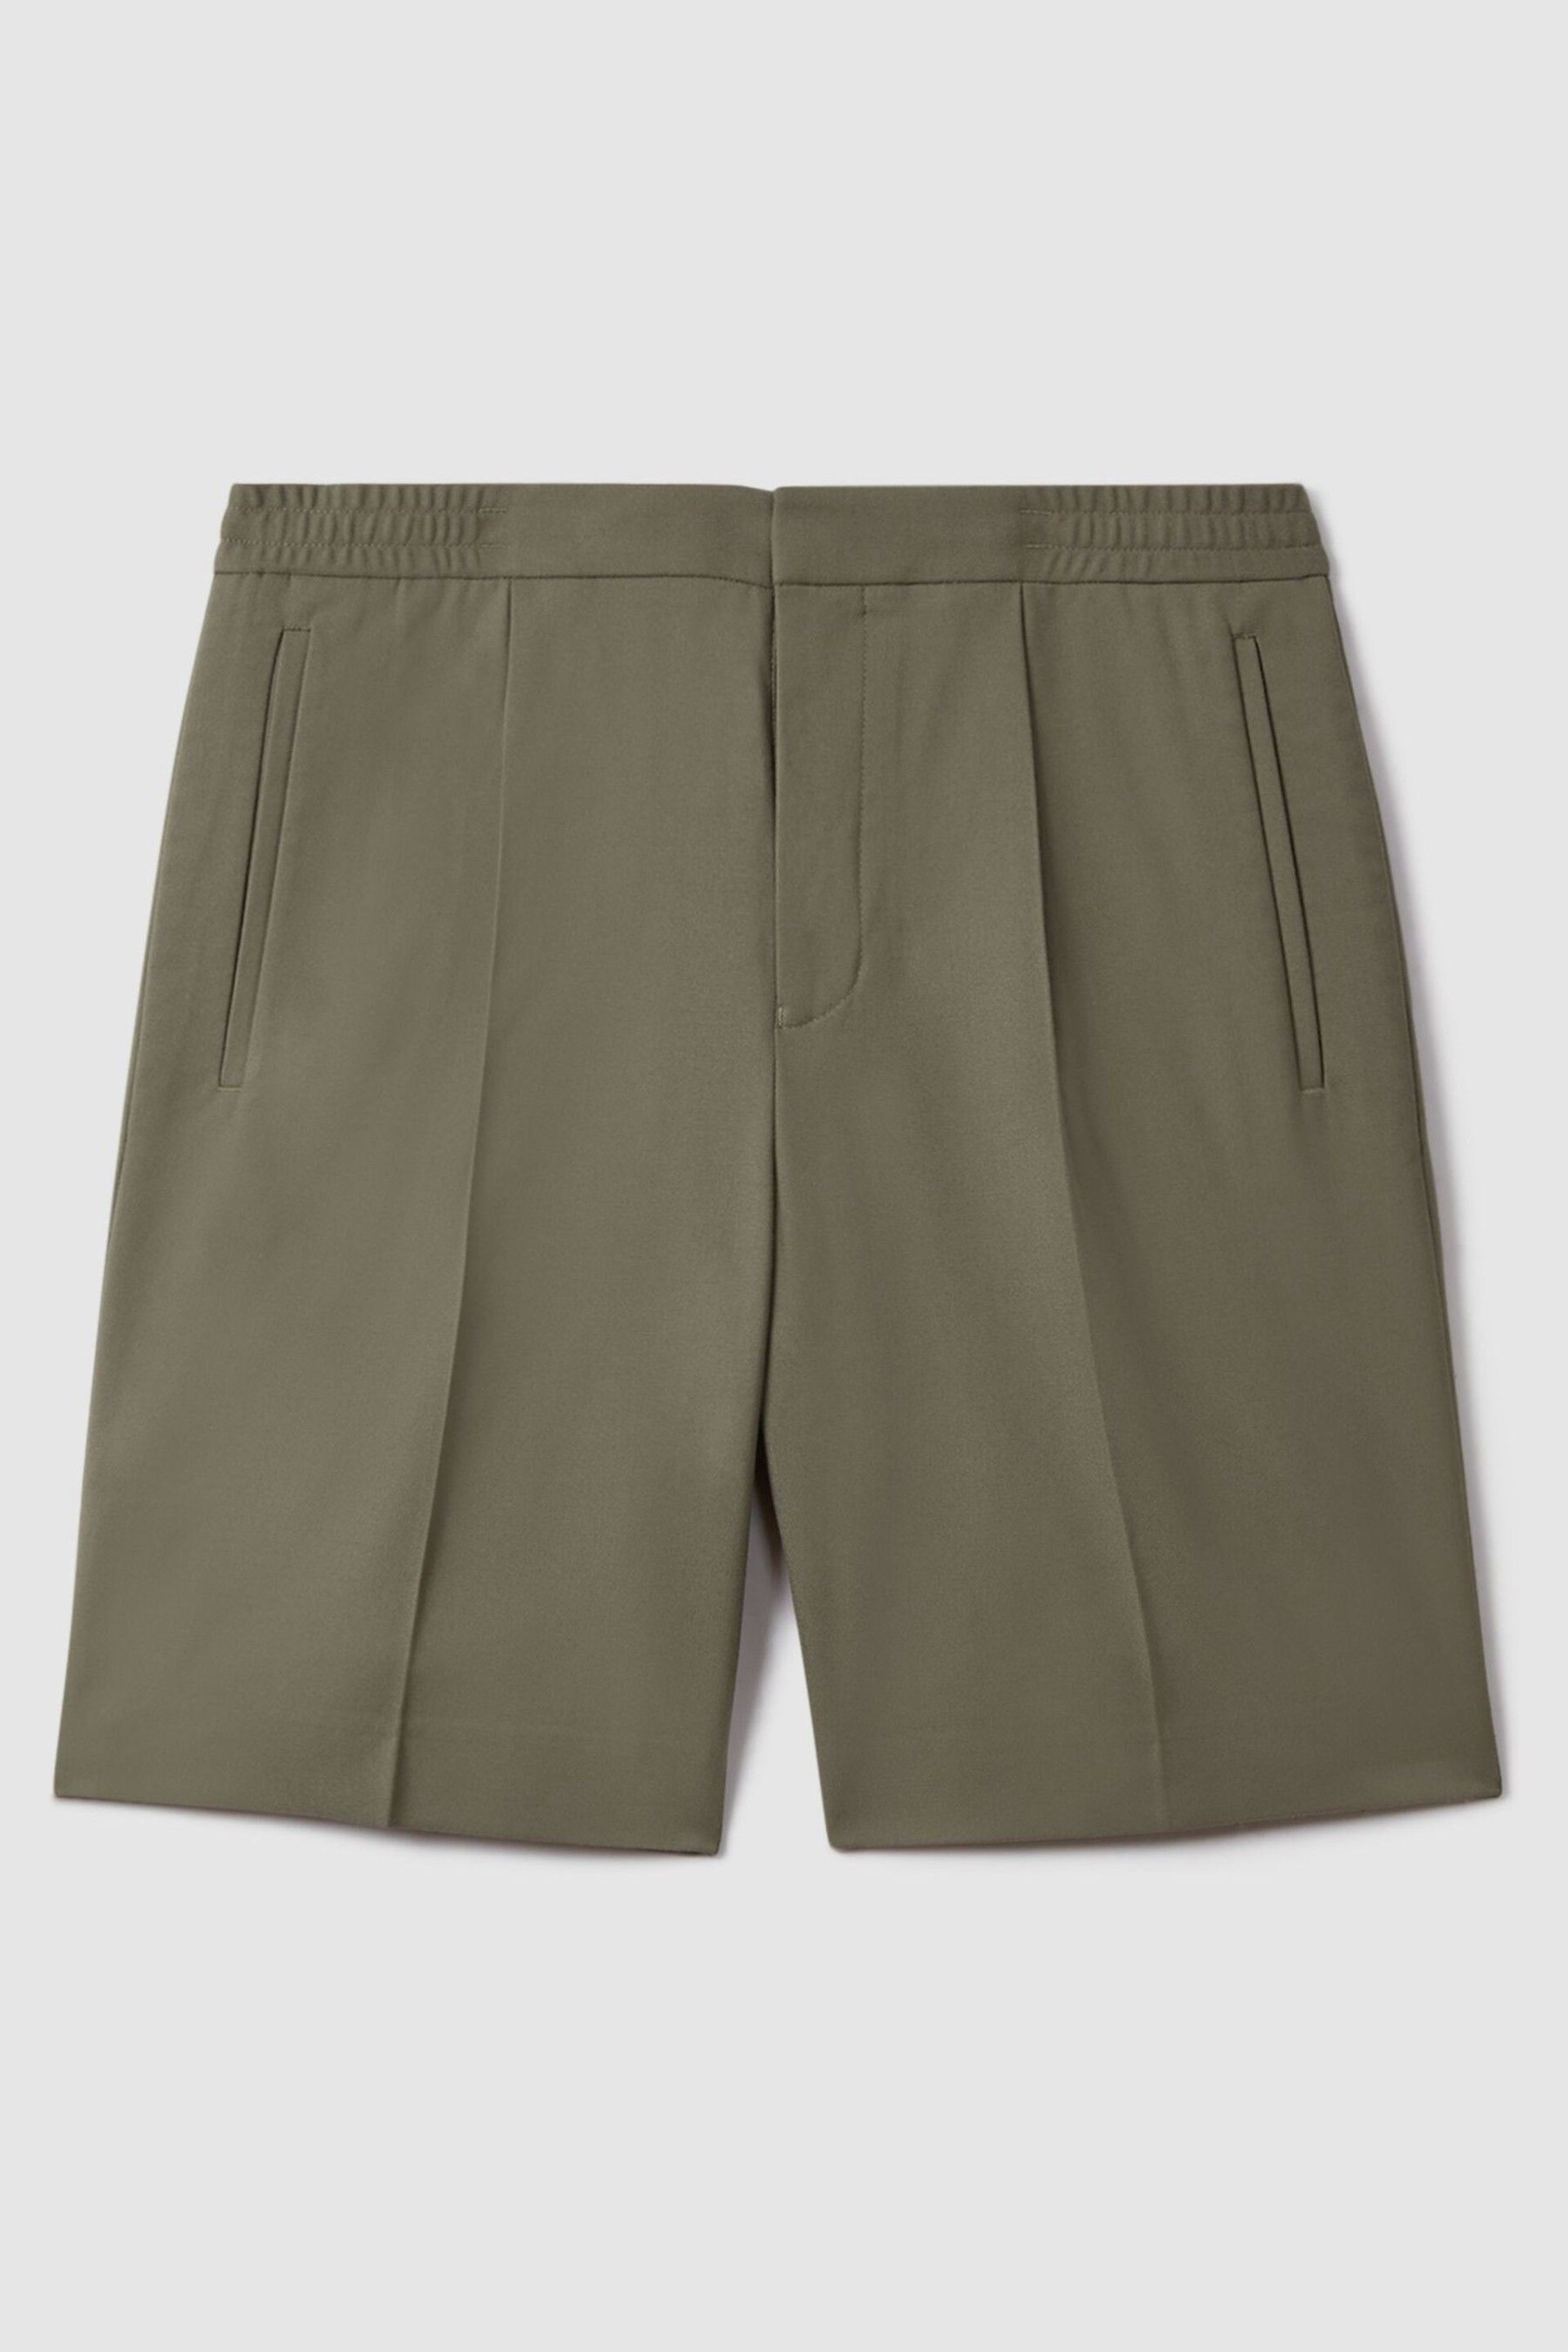 Reiss Sage Sussex Relaxed Drawstring Shorts - Image 2 of 6